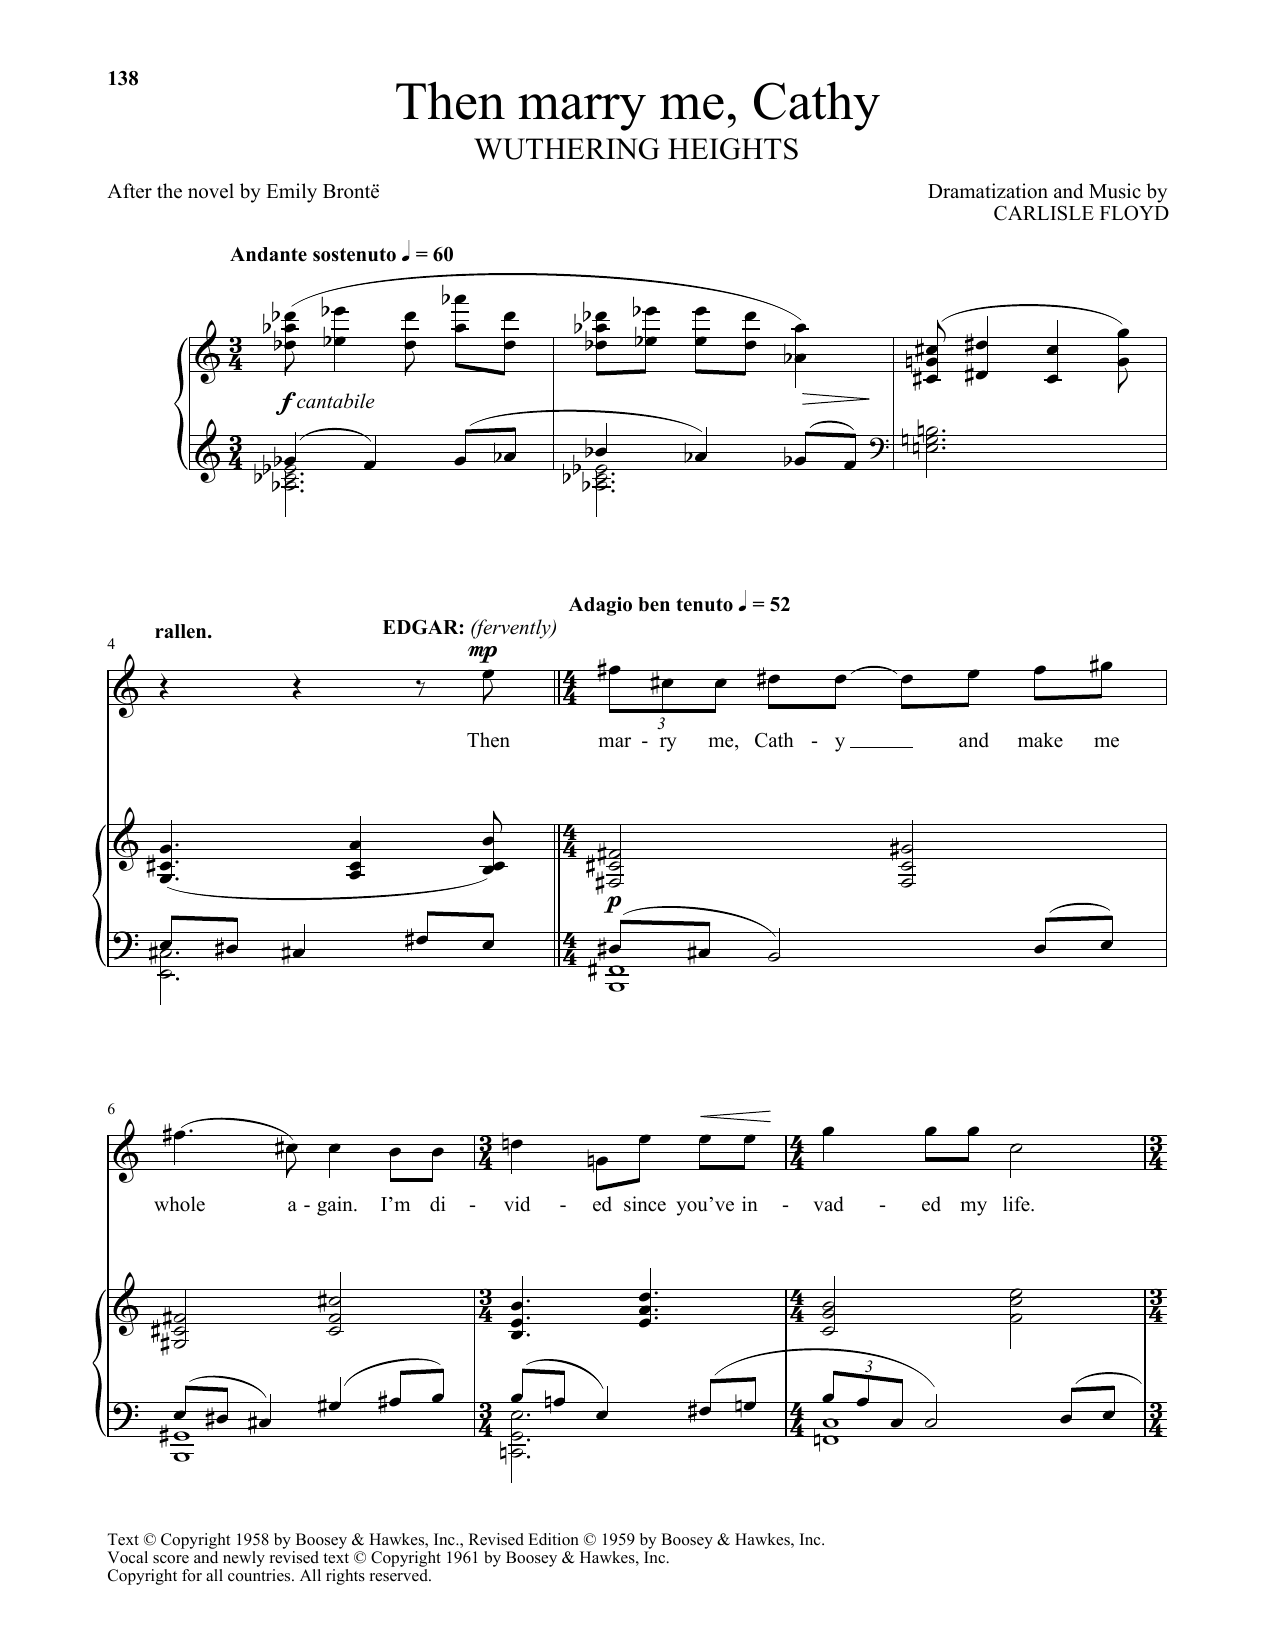 Download Carlisle Floyd Then Marry Me, Cathy Sheet Music